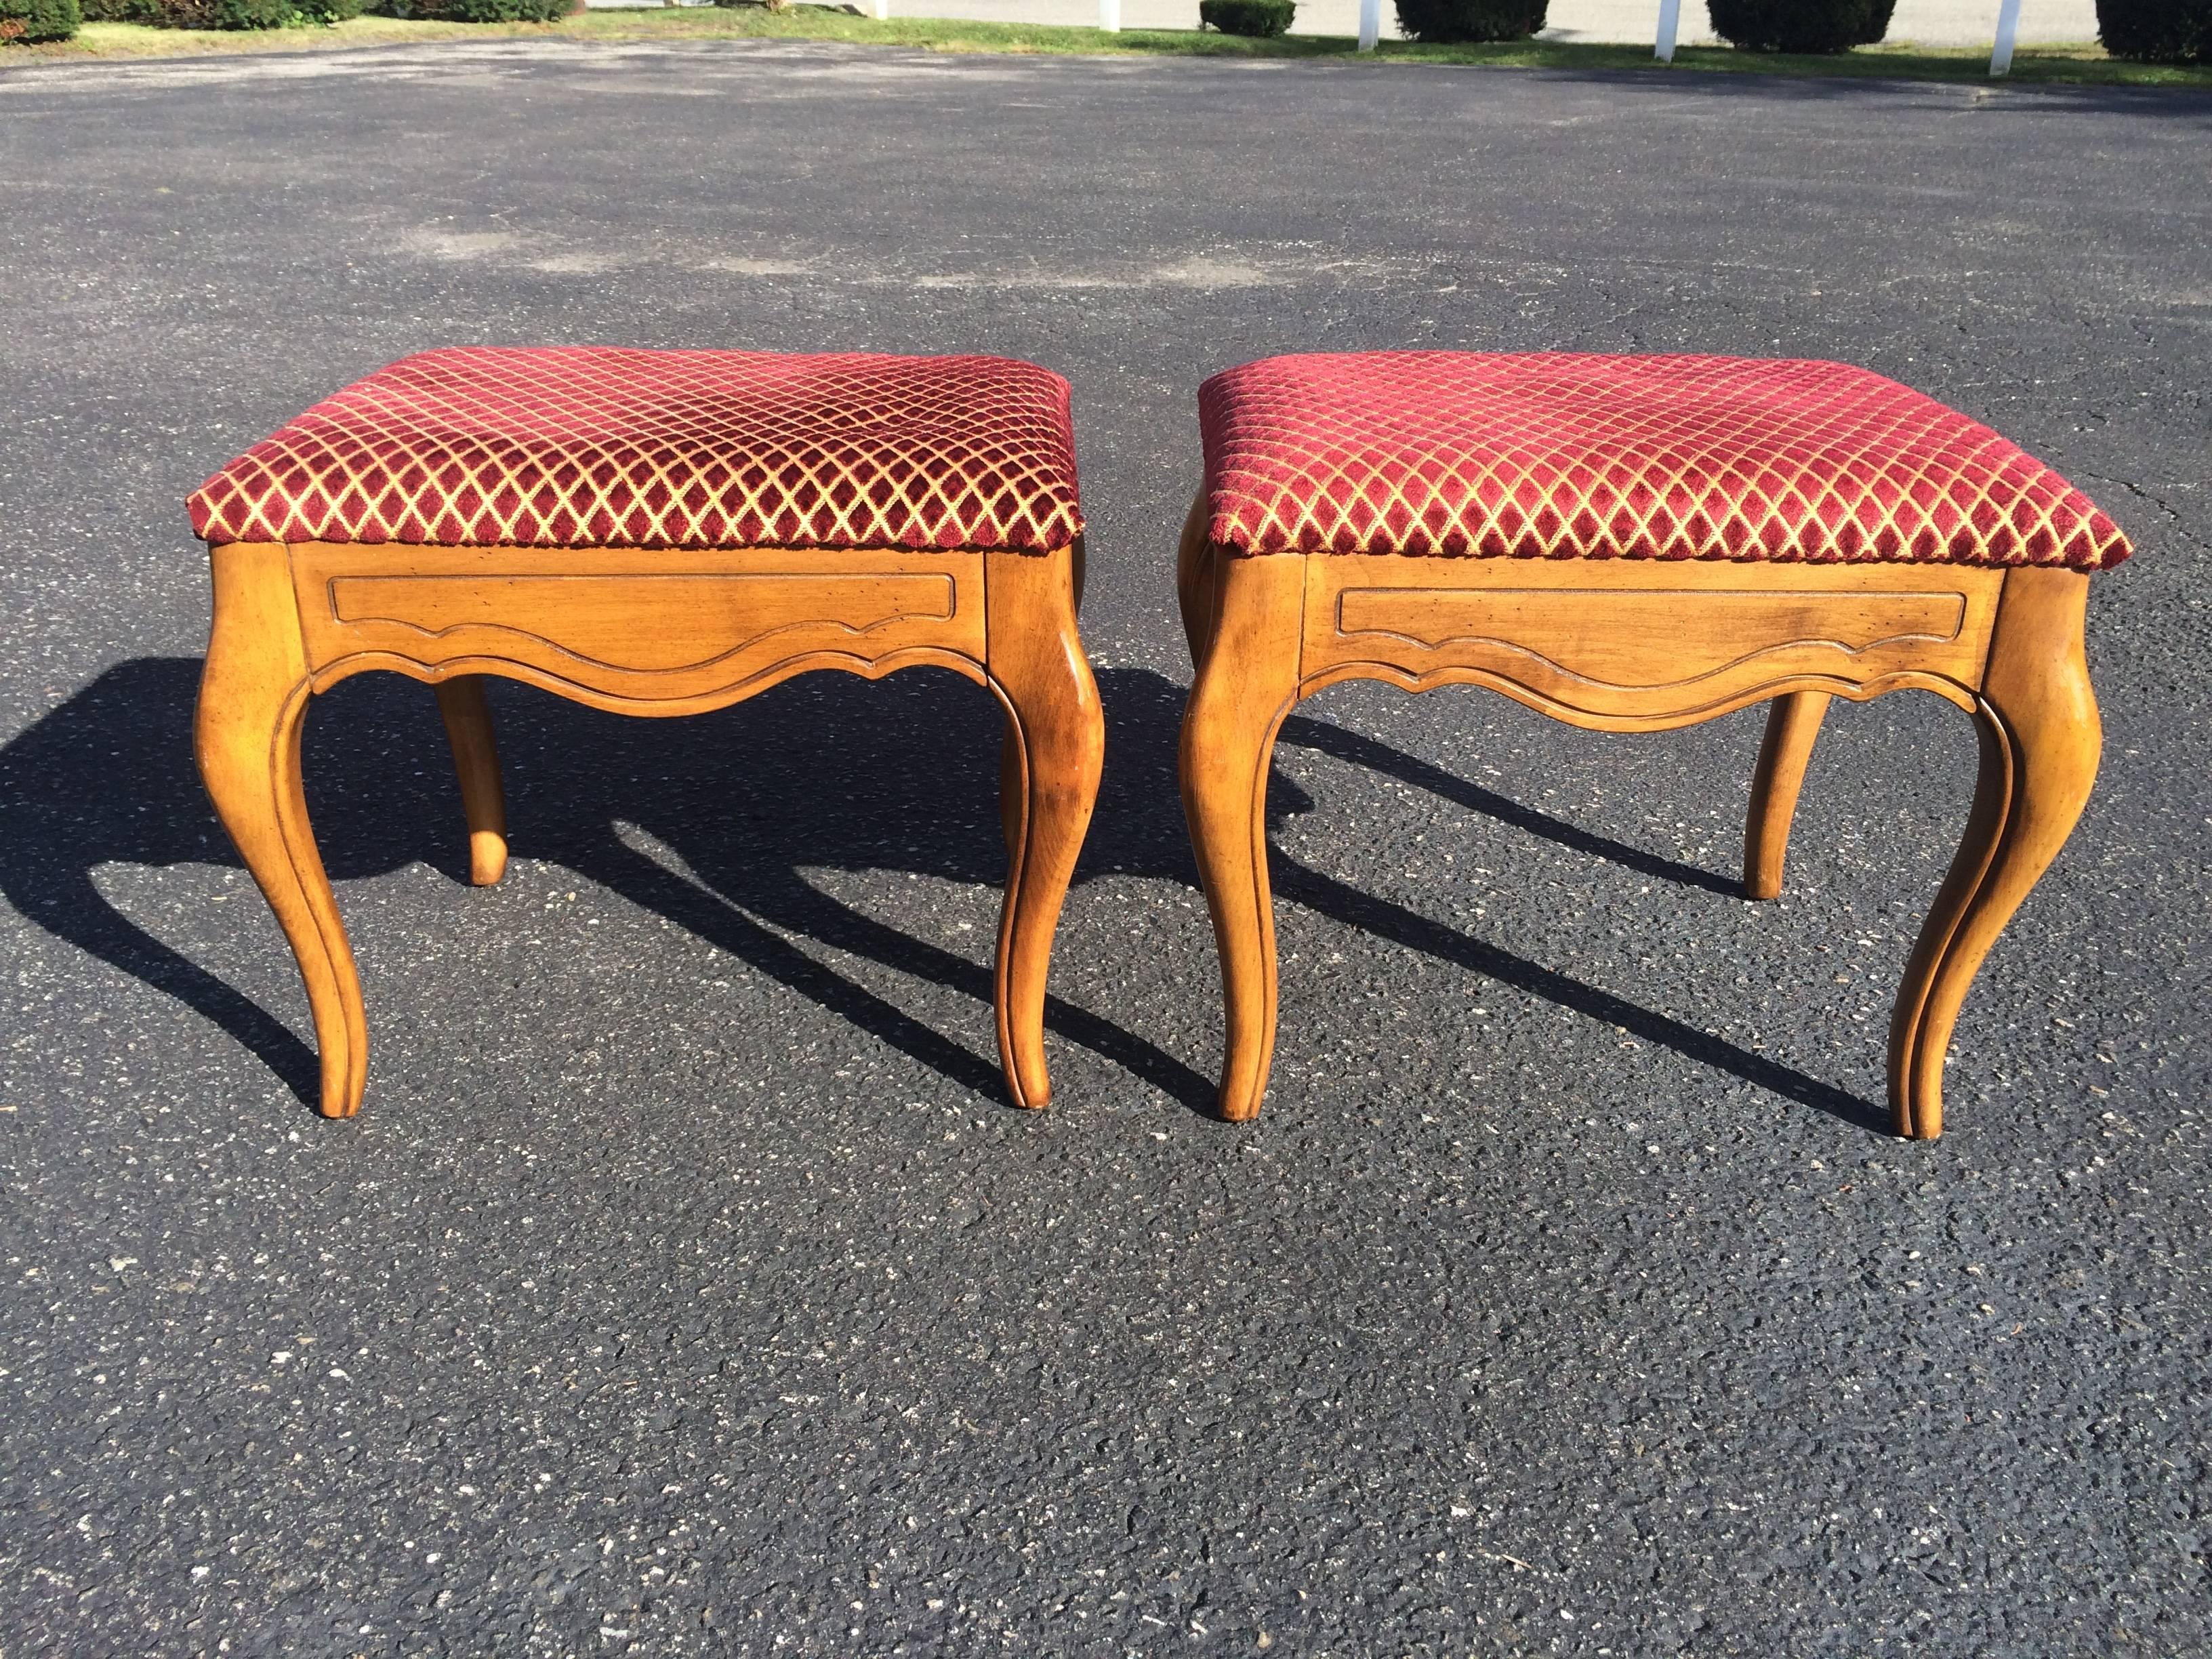 Pair of Ethan Allen stools. Upholstered top and scalloped wooden bottom. Great for underneath a wooden console table. Easy to recover in a more modern fabric. Most likely maple hardwood . French country style.